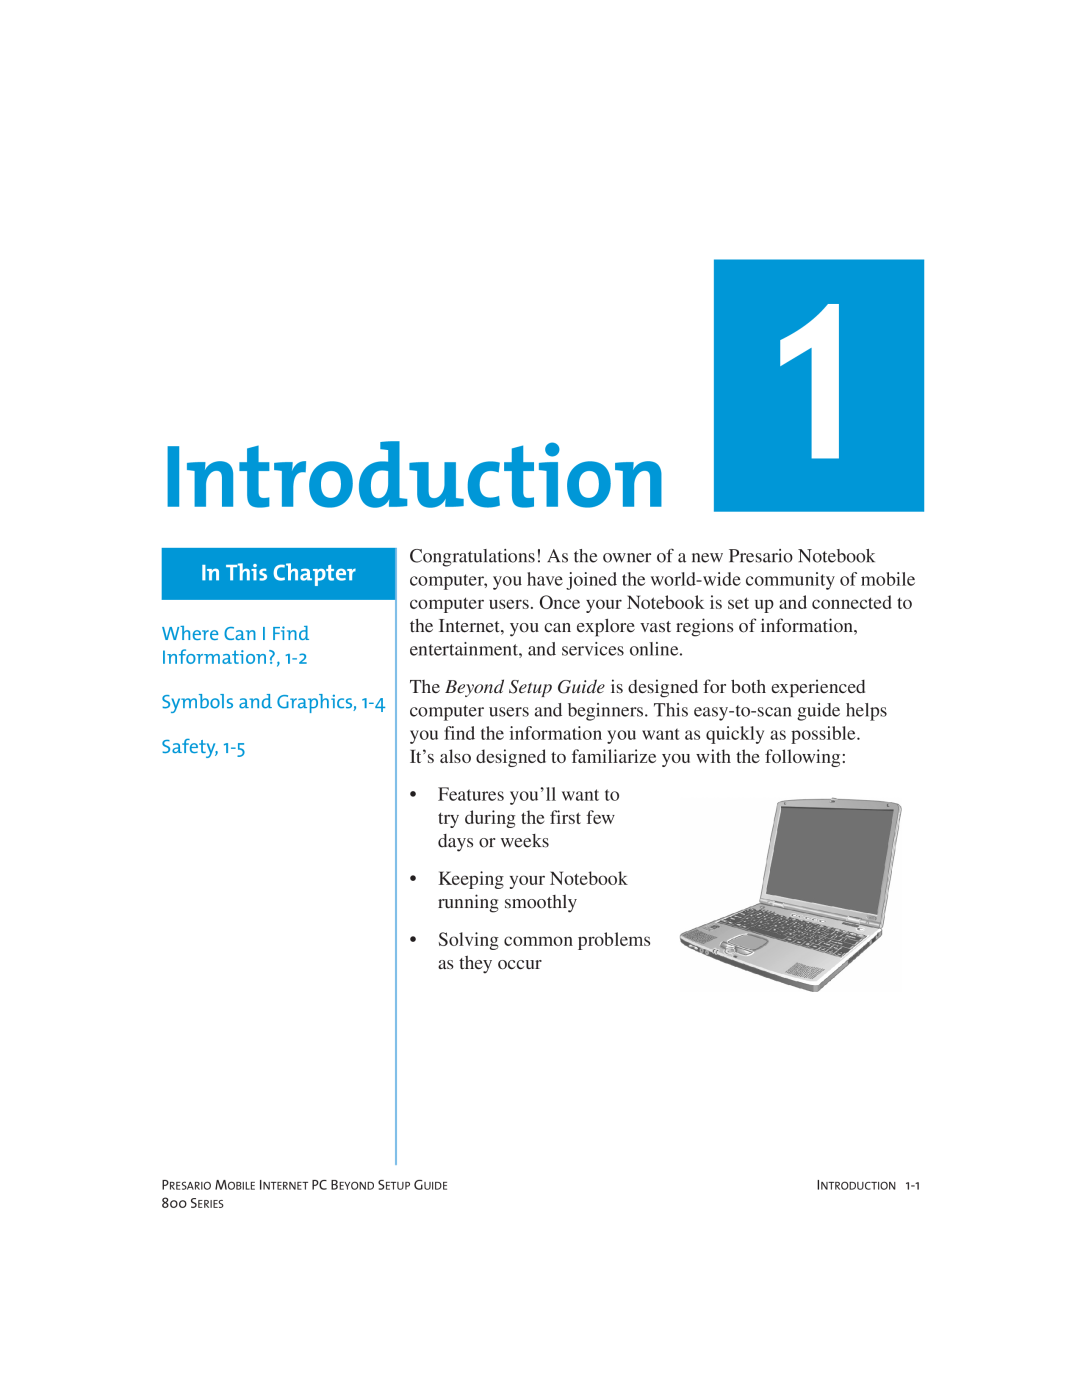 Compaq 800 manual Introduction, In This Chapter, Where Can I Find Information?, Symbols and Graphics, Safety 